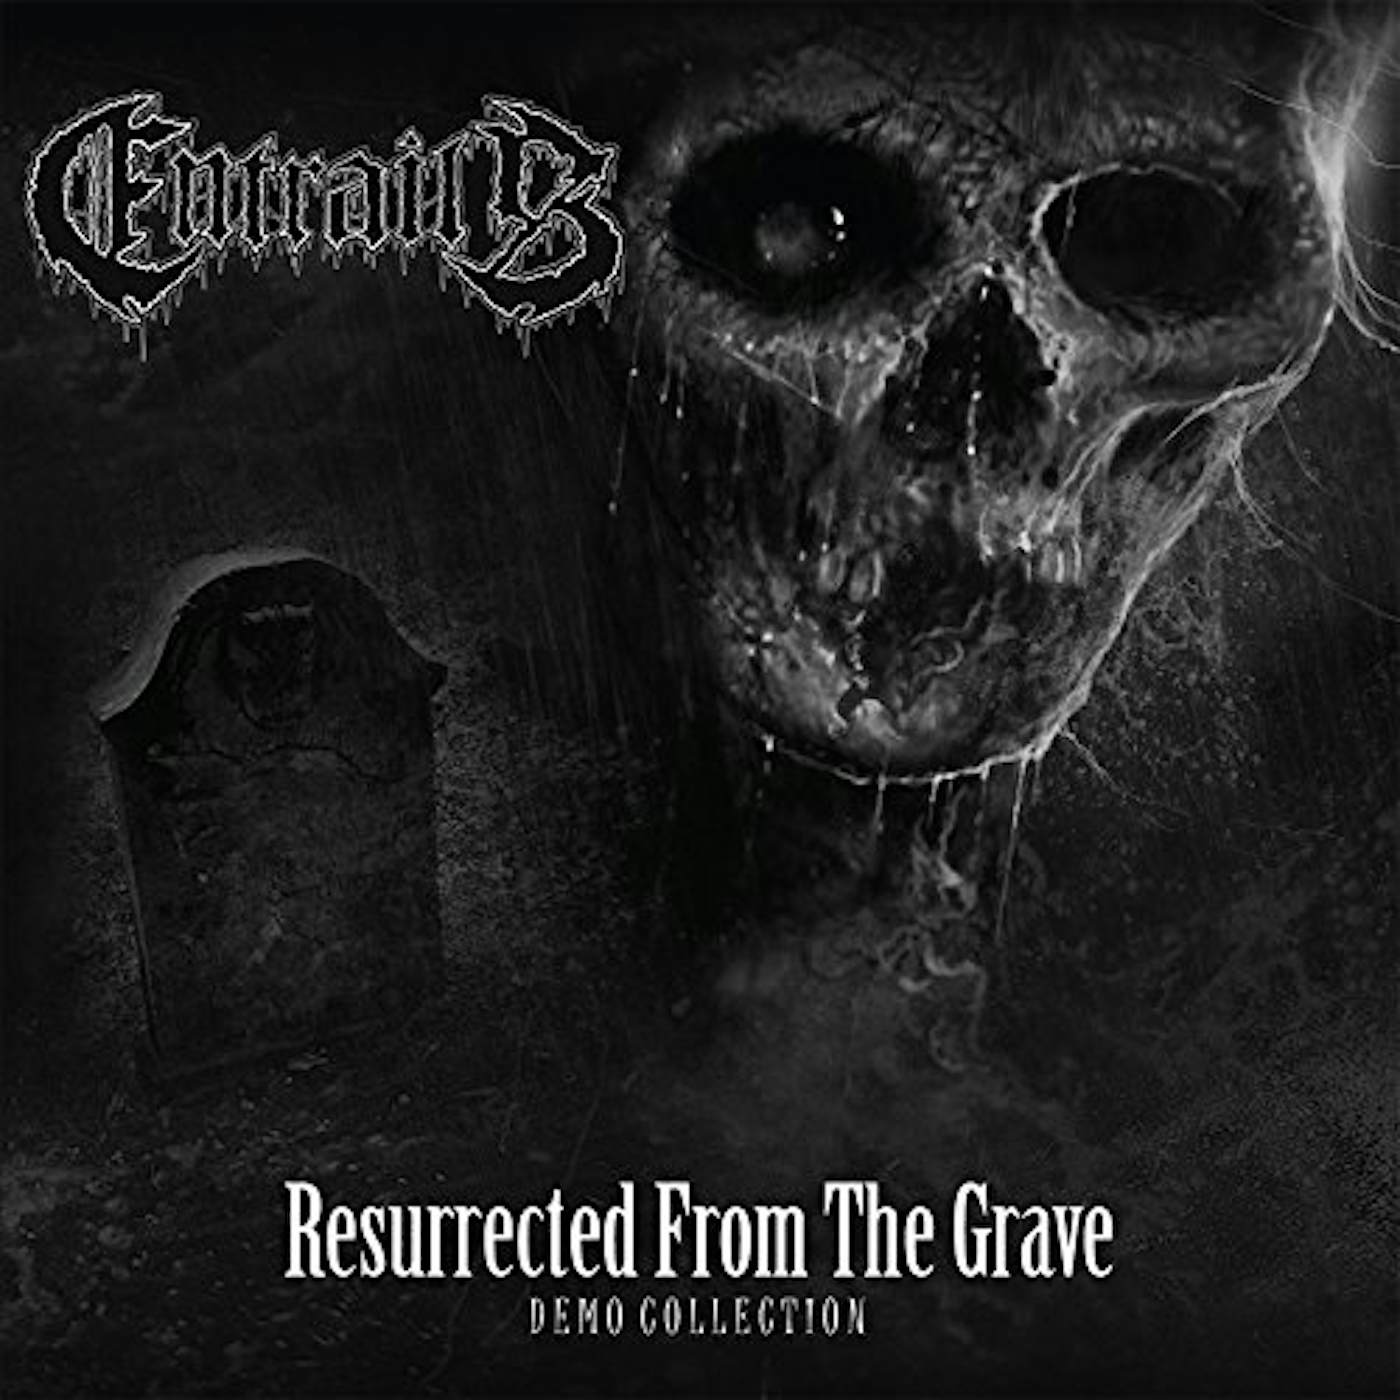 Entrails RESURRECTED FROM THE GRAVE CD